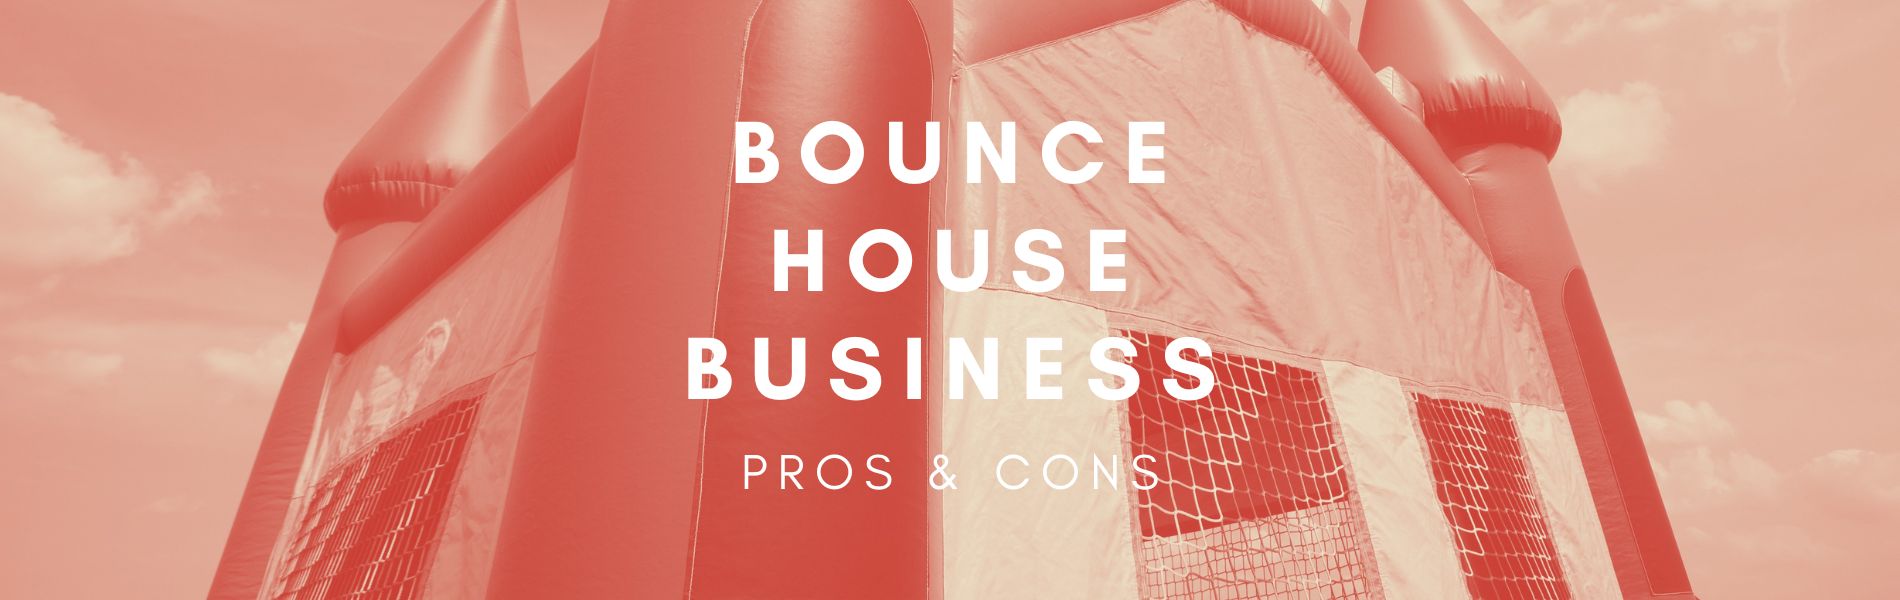 pros and cons of owning a bounce house business